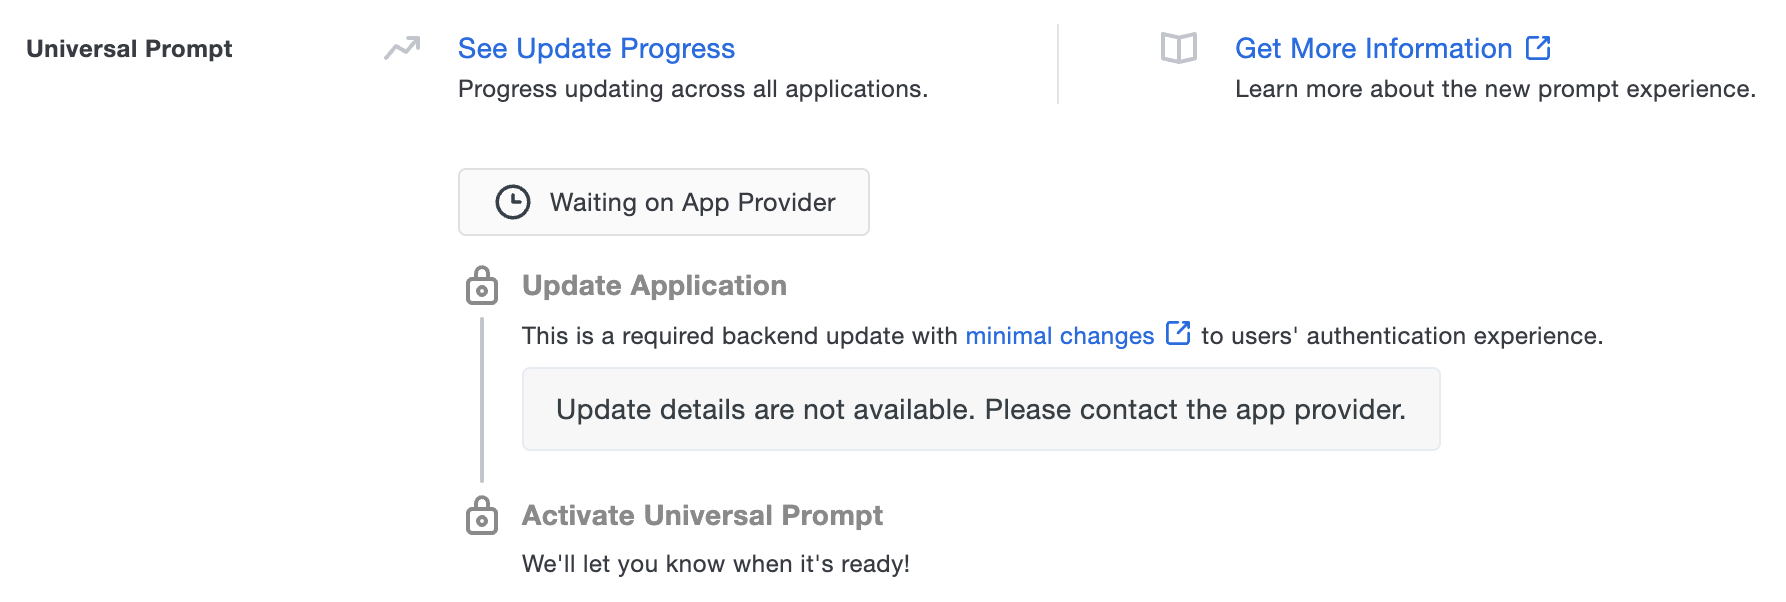 Universal Prompt Info - Update Not Yet Available